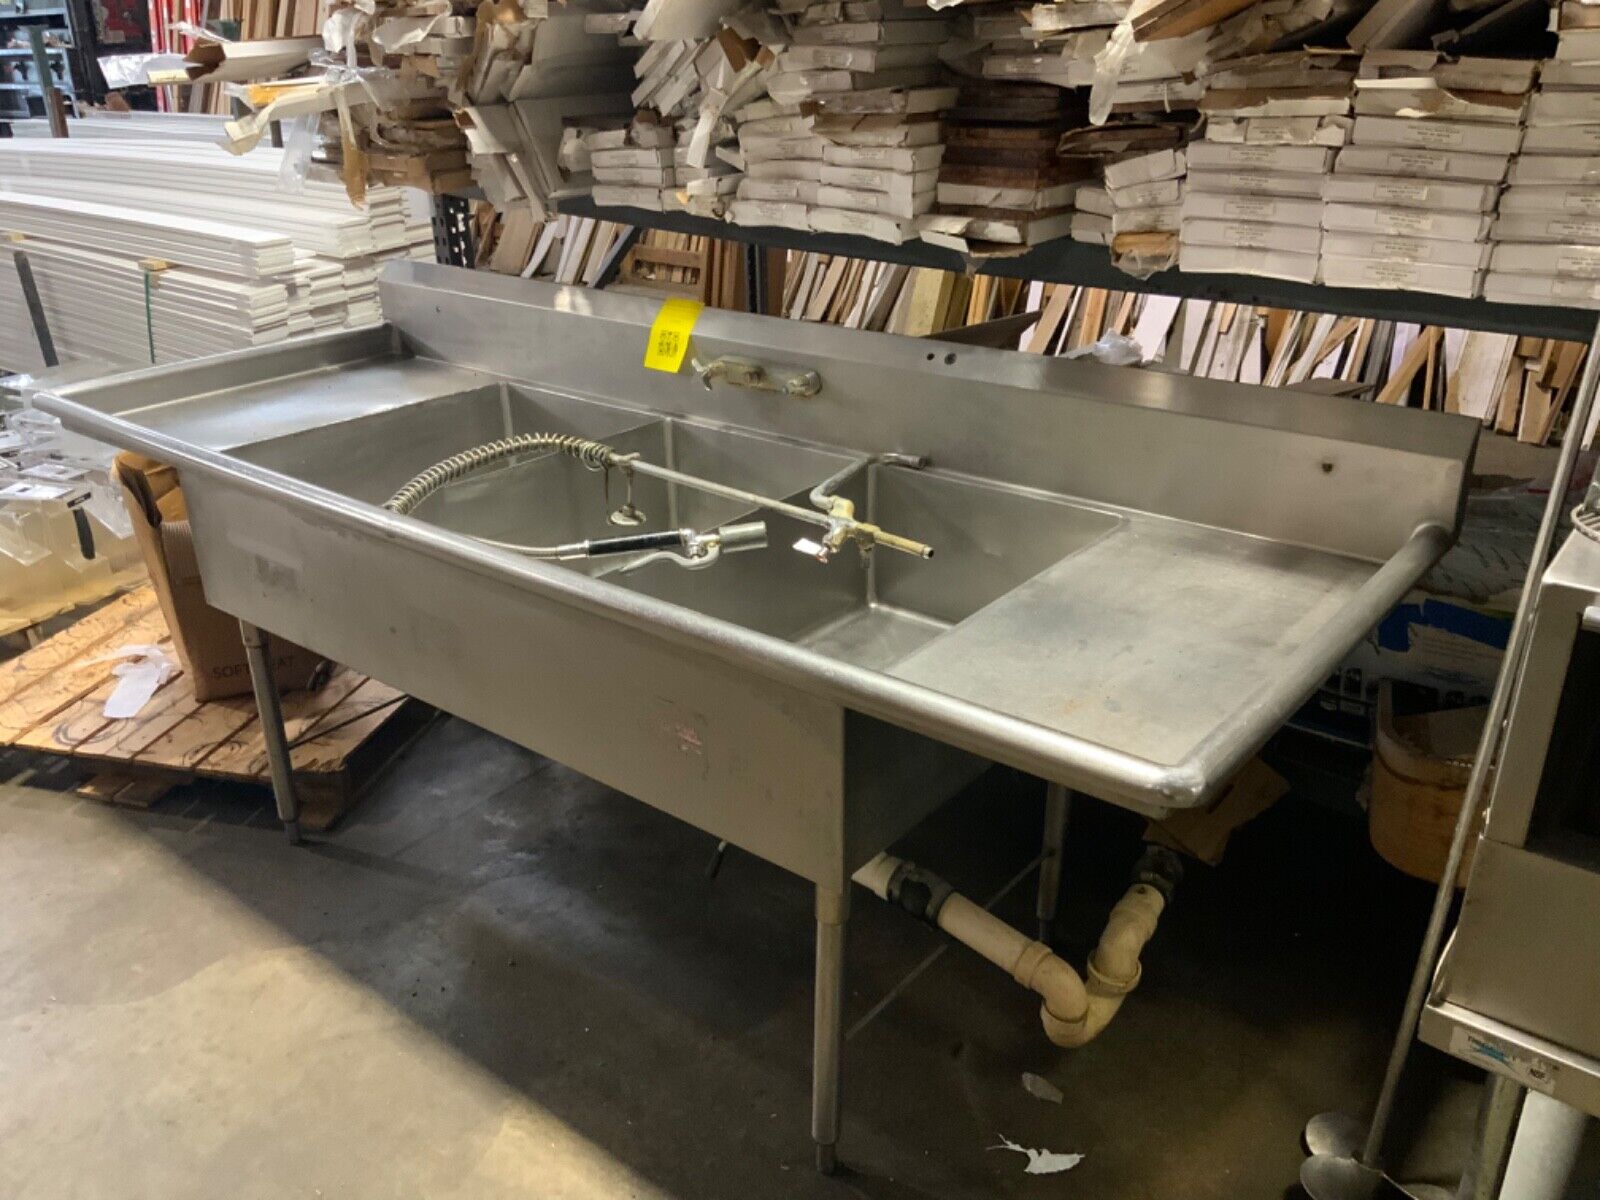 Restuarant Sink Commercial 3 Basin Stainless Steel Faucet Included